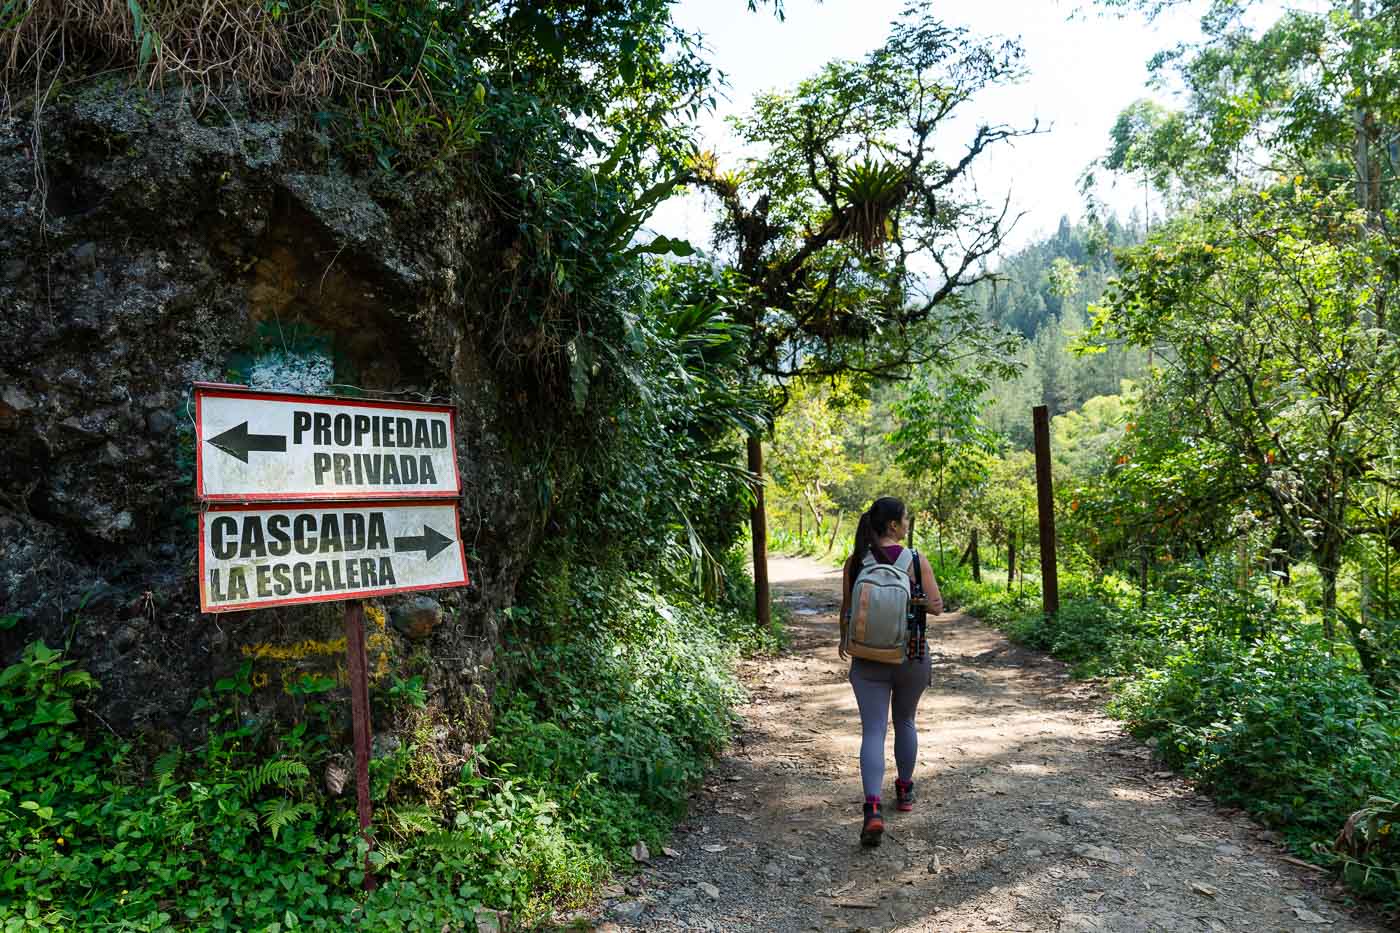 Sara walking down a pathway with the sign for Cascada la Escalera to her left.